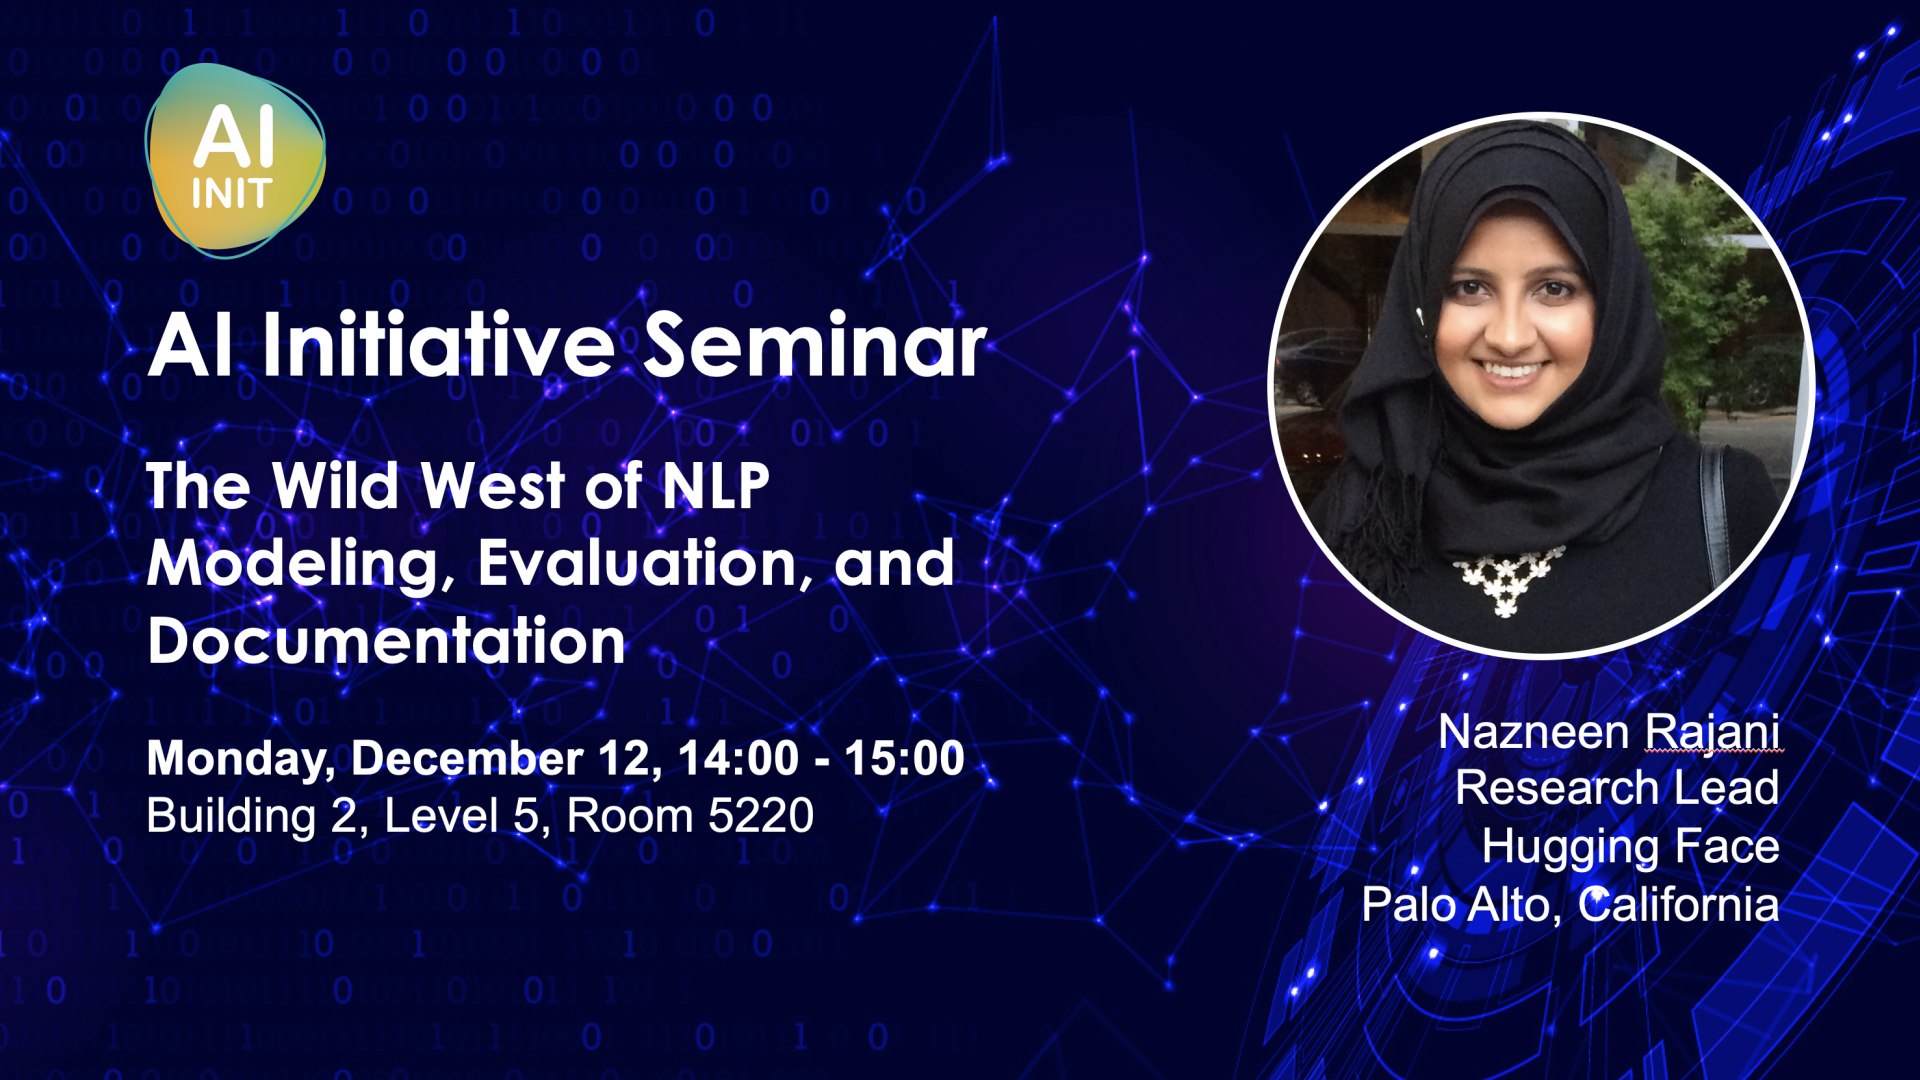 KAUST-CEMSE-AI-The-Wild-West-of-NLP-Modeling-Evaluation-and-Documentation-Nazneen-Rajani 